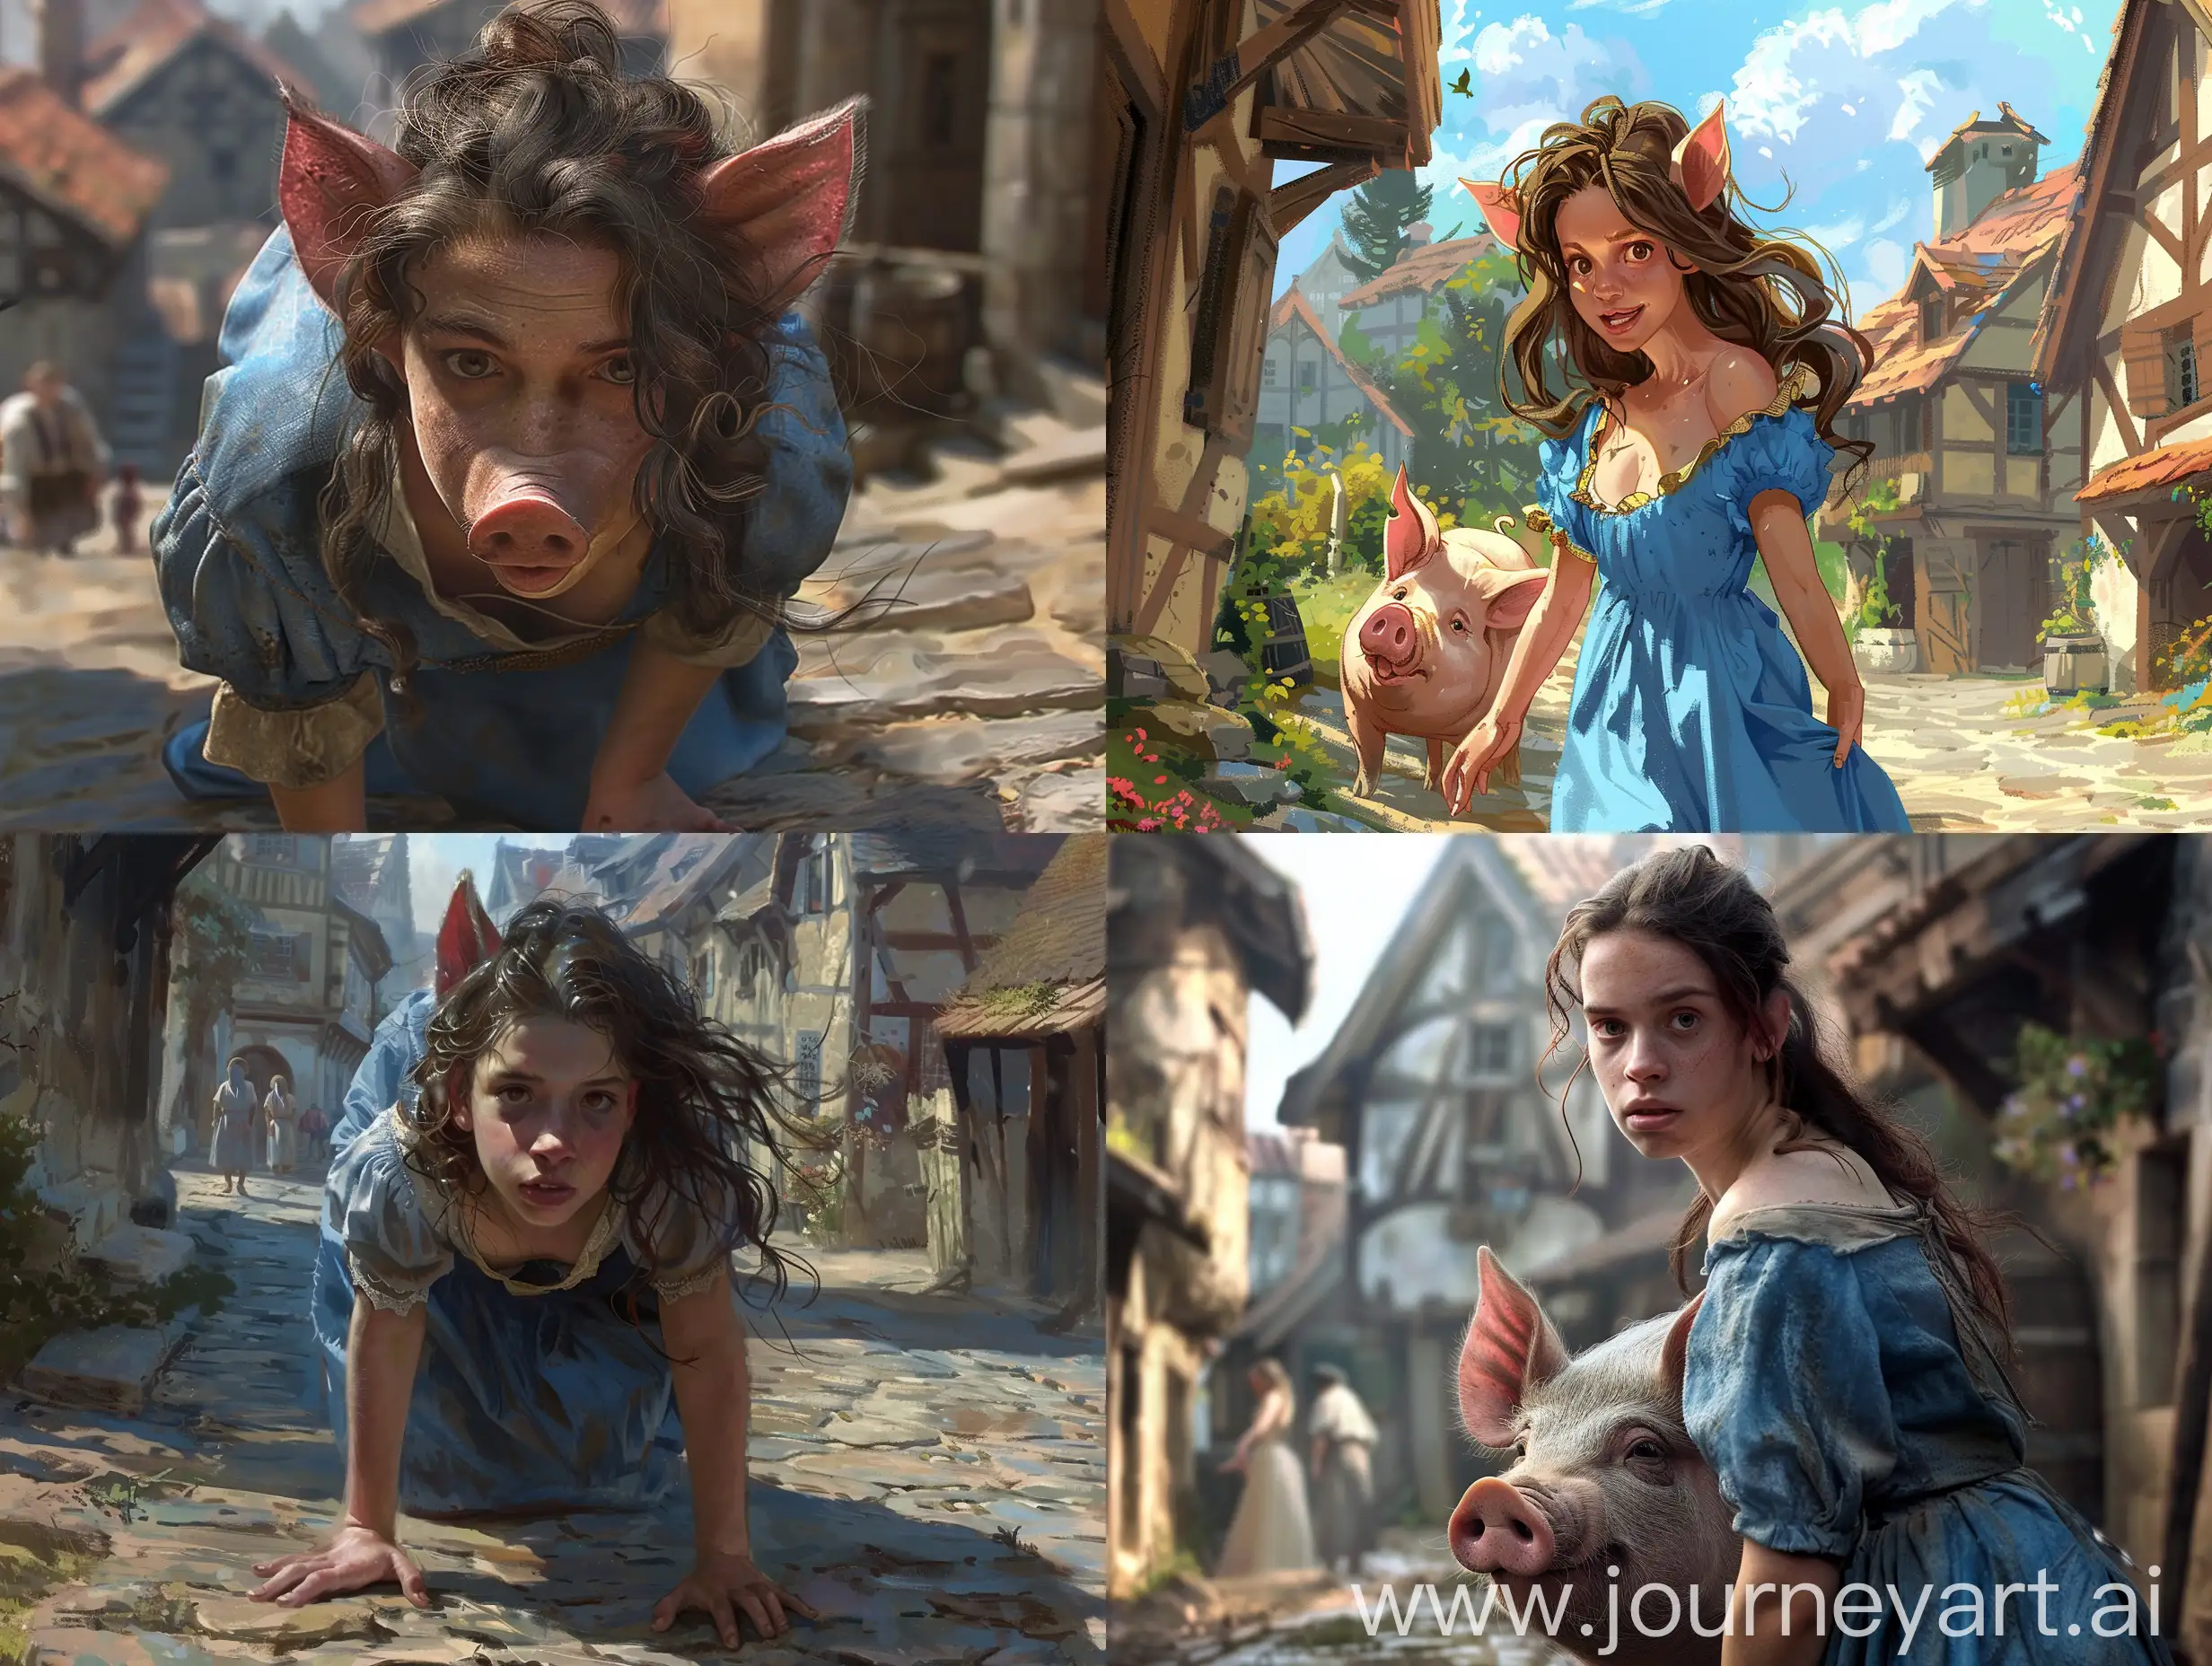 A young woman with loose brown hair who is transforming into a pig due to a magic spell. She has pig's ears, snout and hooves. She is standing on all fours. She is wearing a blue dress. The scene is set in a village at noon.